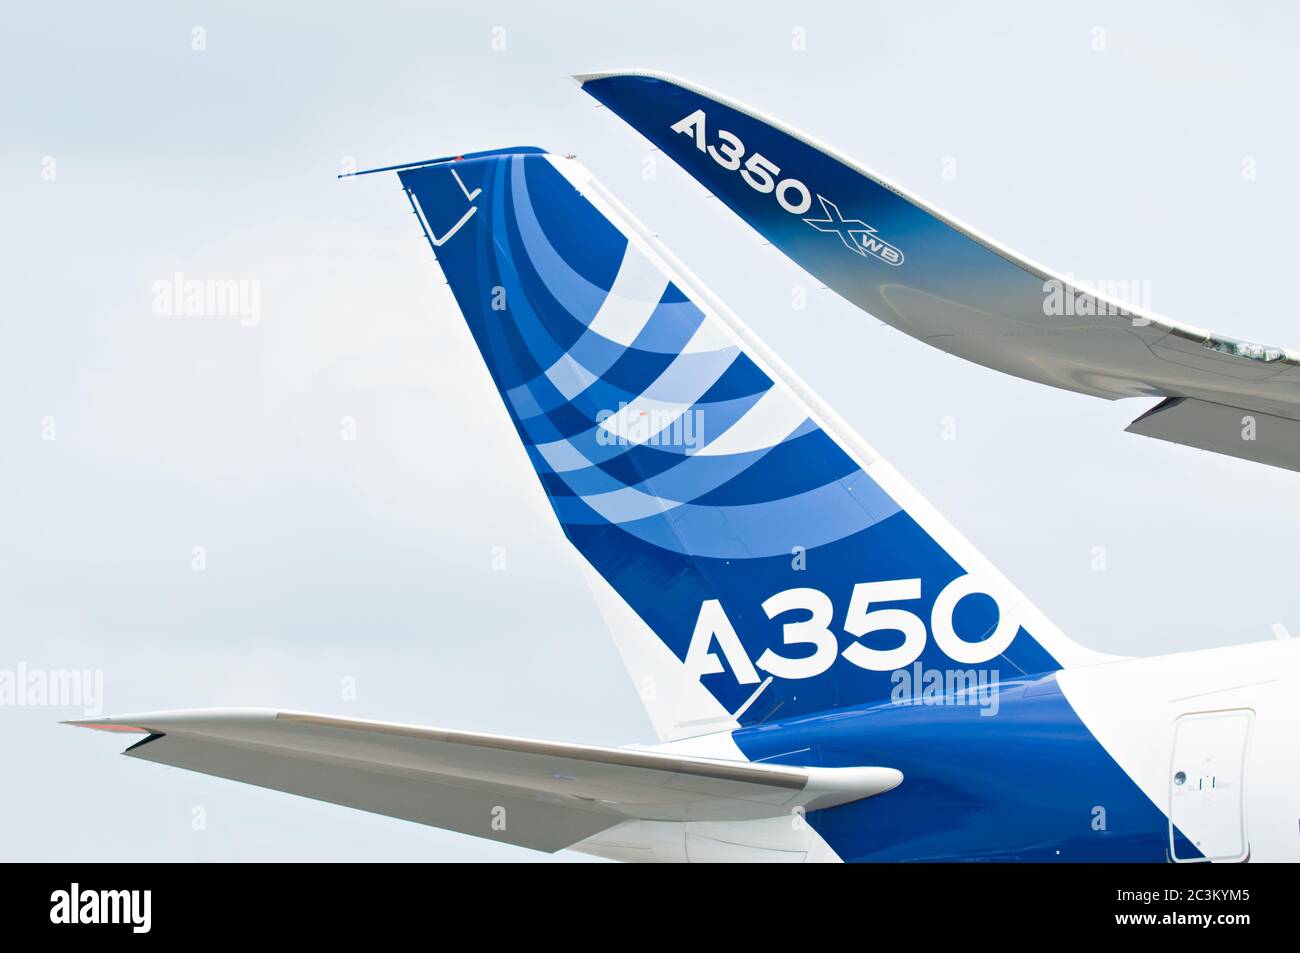 SINGAPORE - FEBRUARY 11: Tailplane and winglet of Airbus A350 XWB prototype 003 at Singapore Airshow, Changi Exhibition Centre in Singapore on Februar Stock Photo